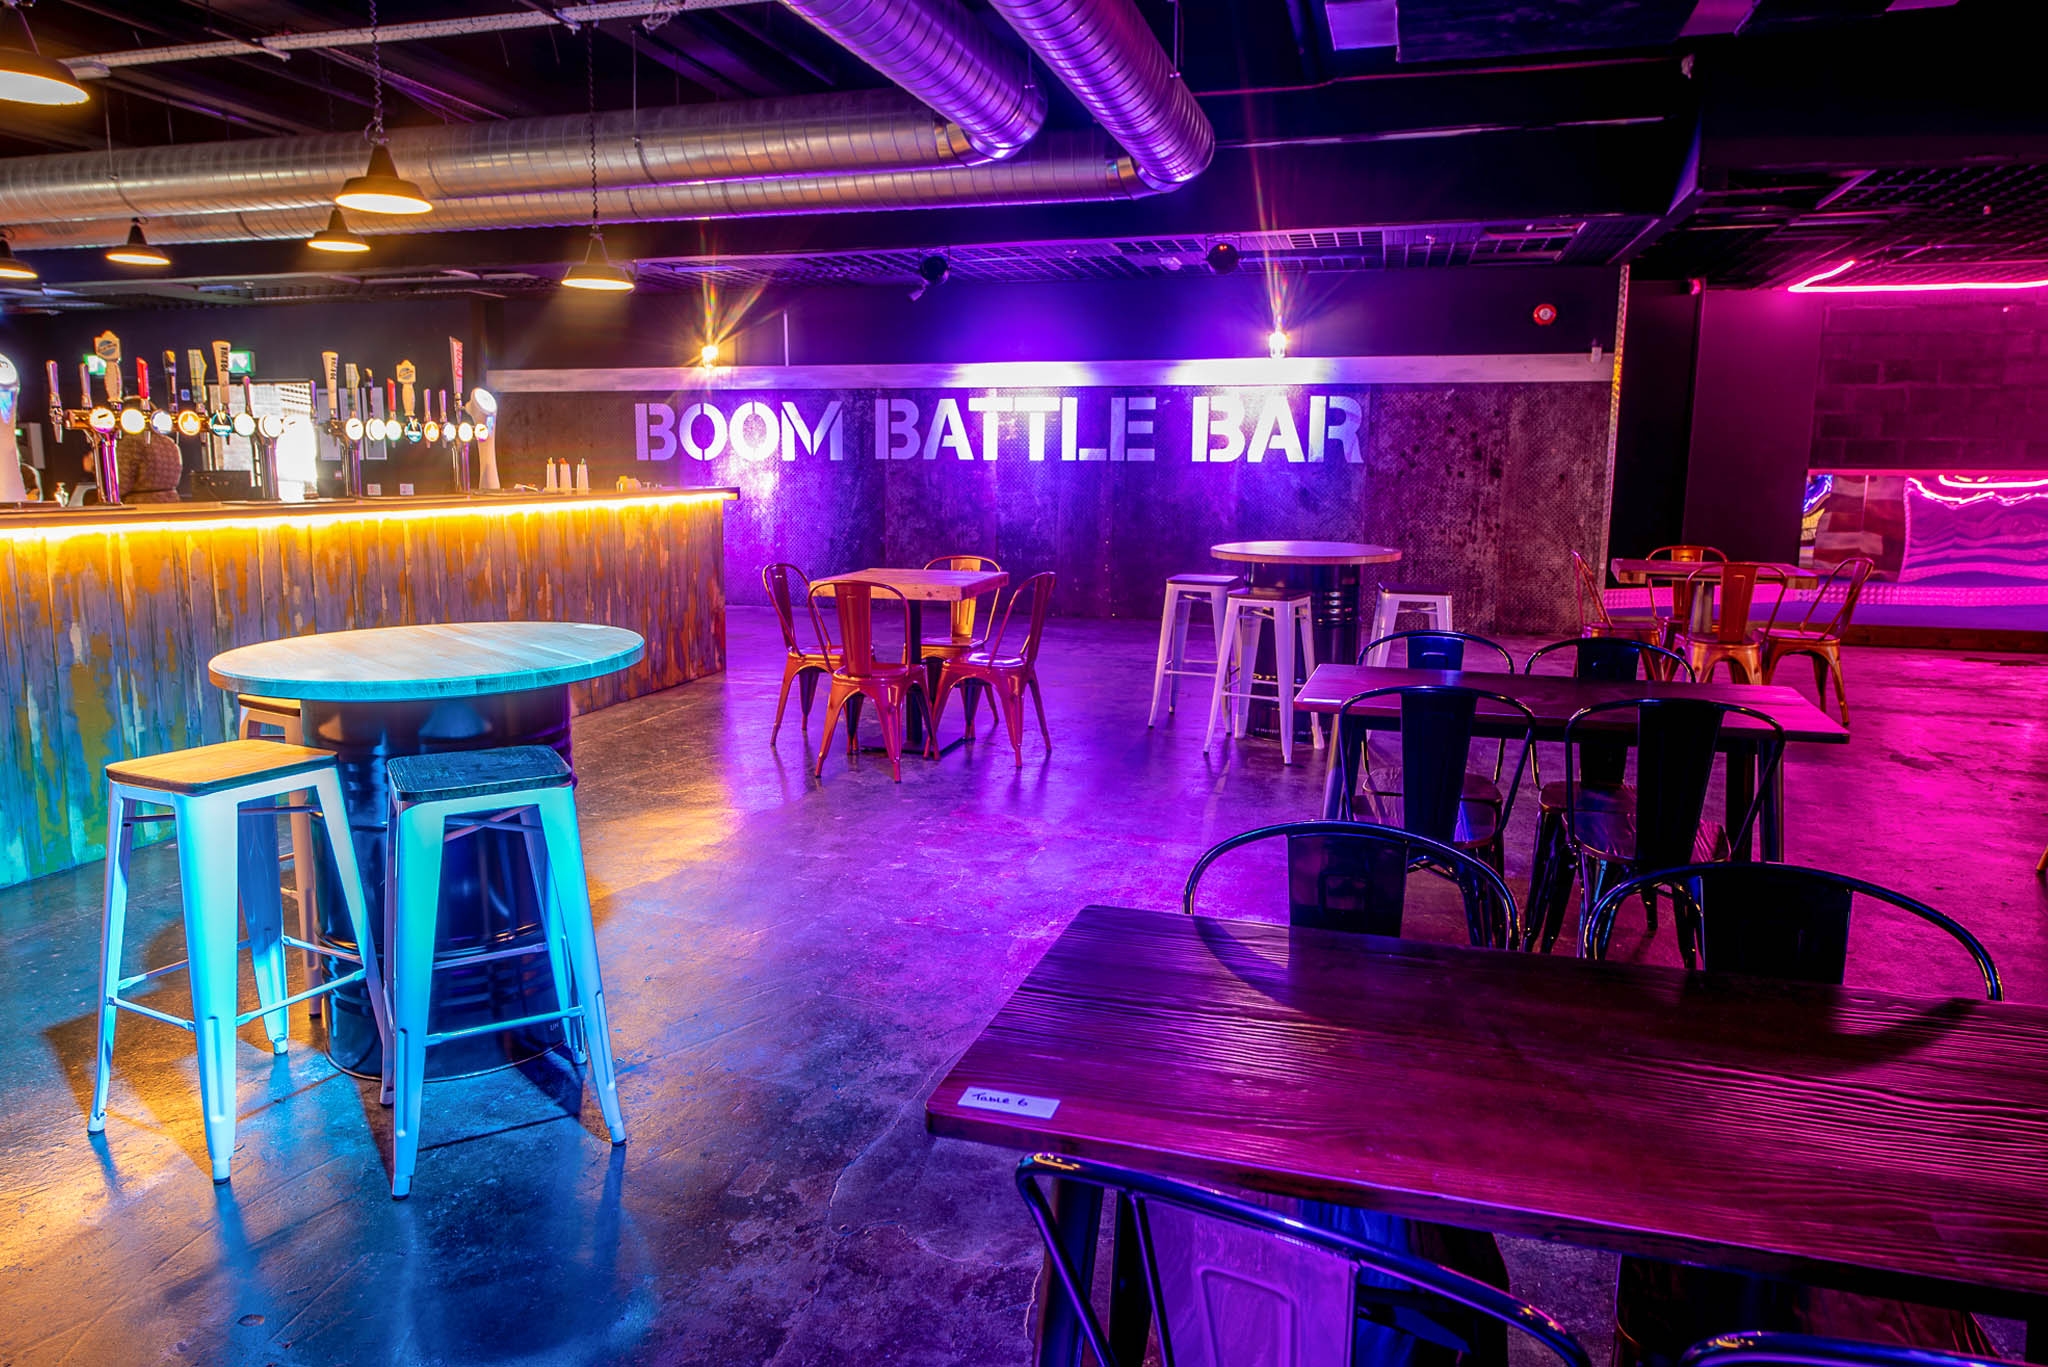 Boom Battle Bar on Wednesday 22nd March